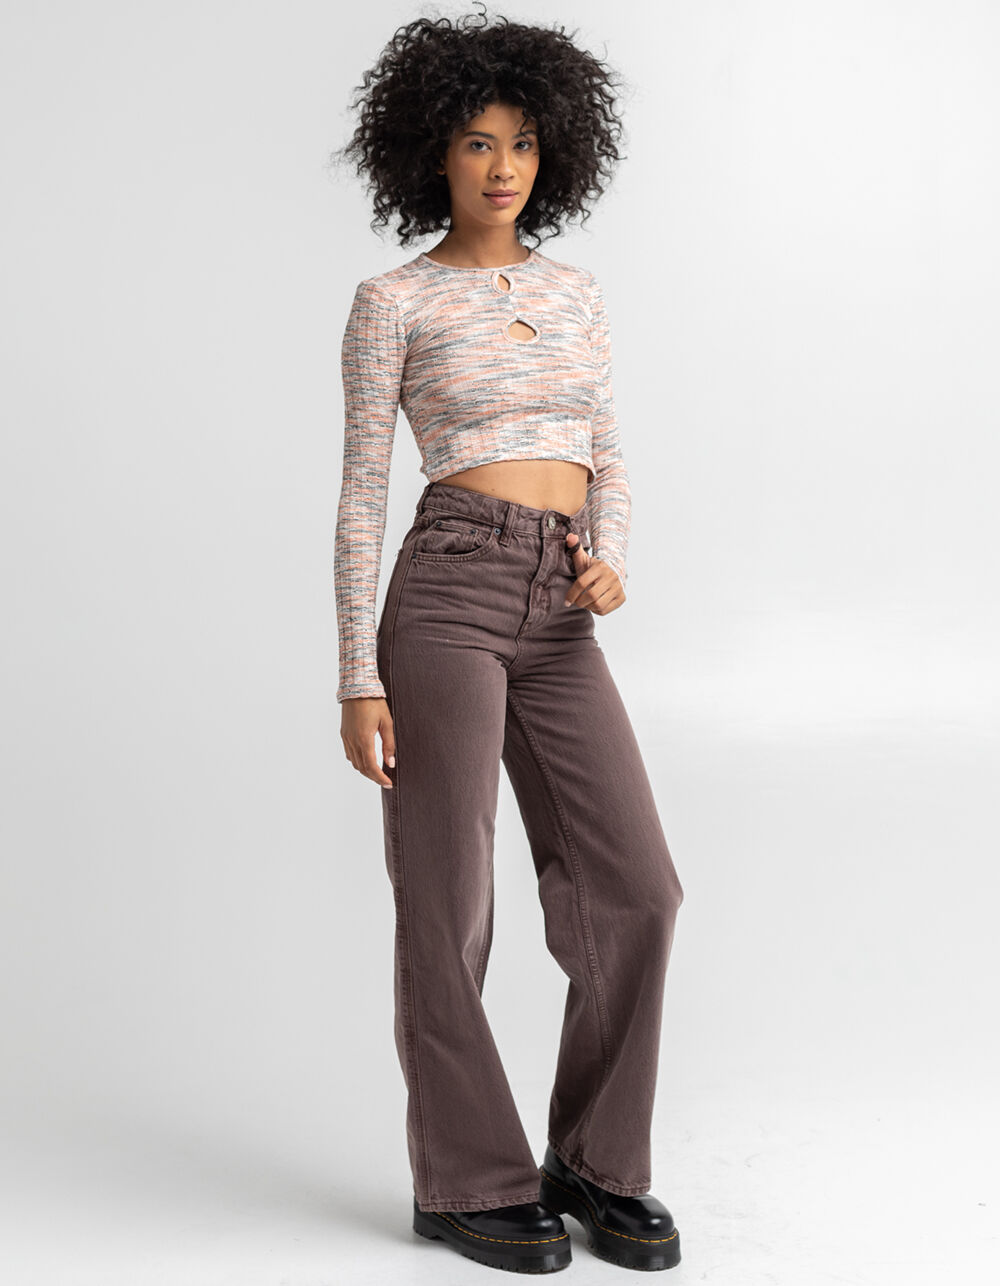 tale vækst hylde BDG Urban Outfitters Puddle Womens Jeans - BROWN | Tillys